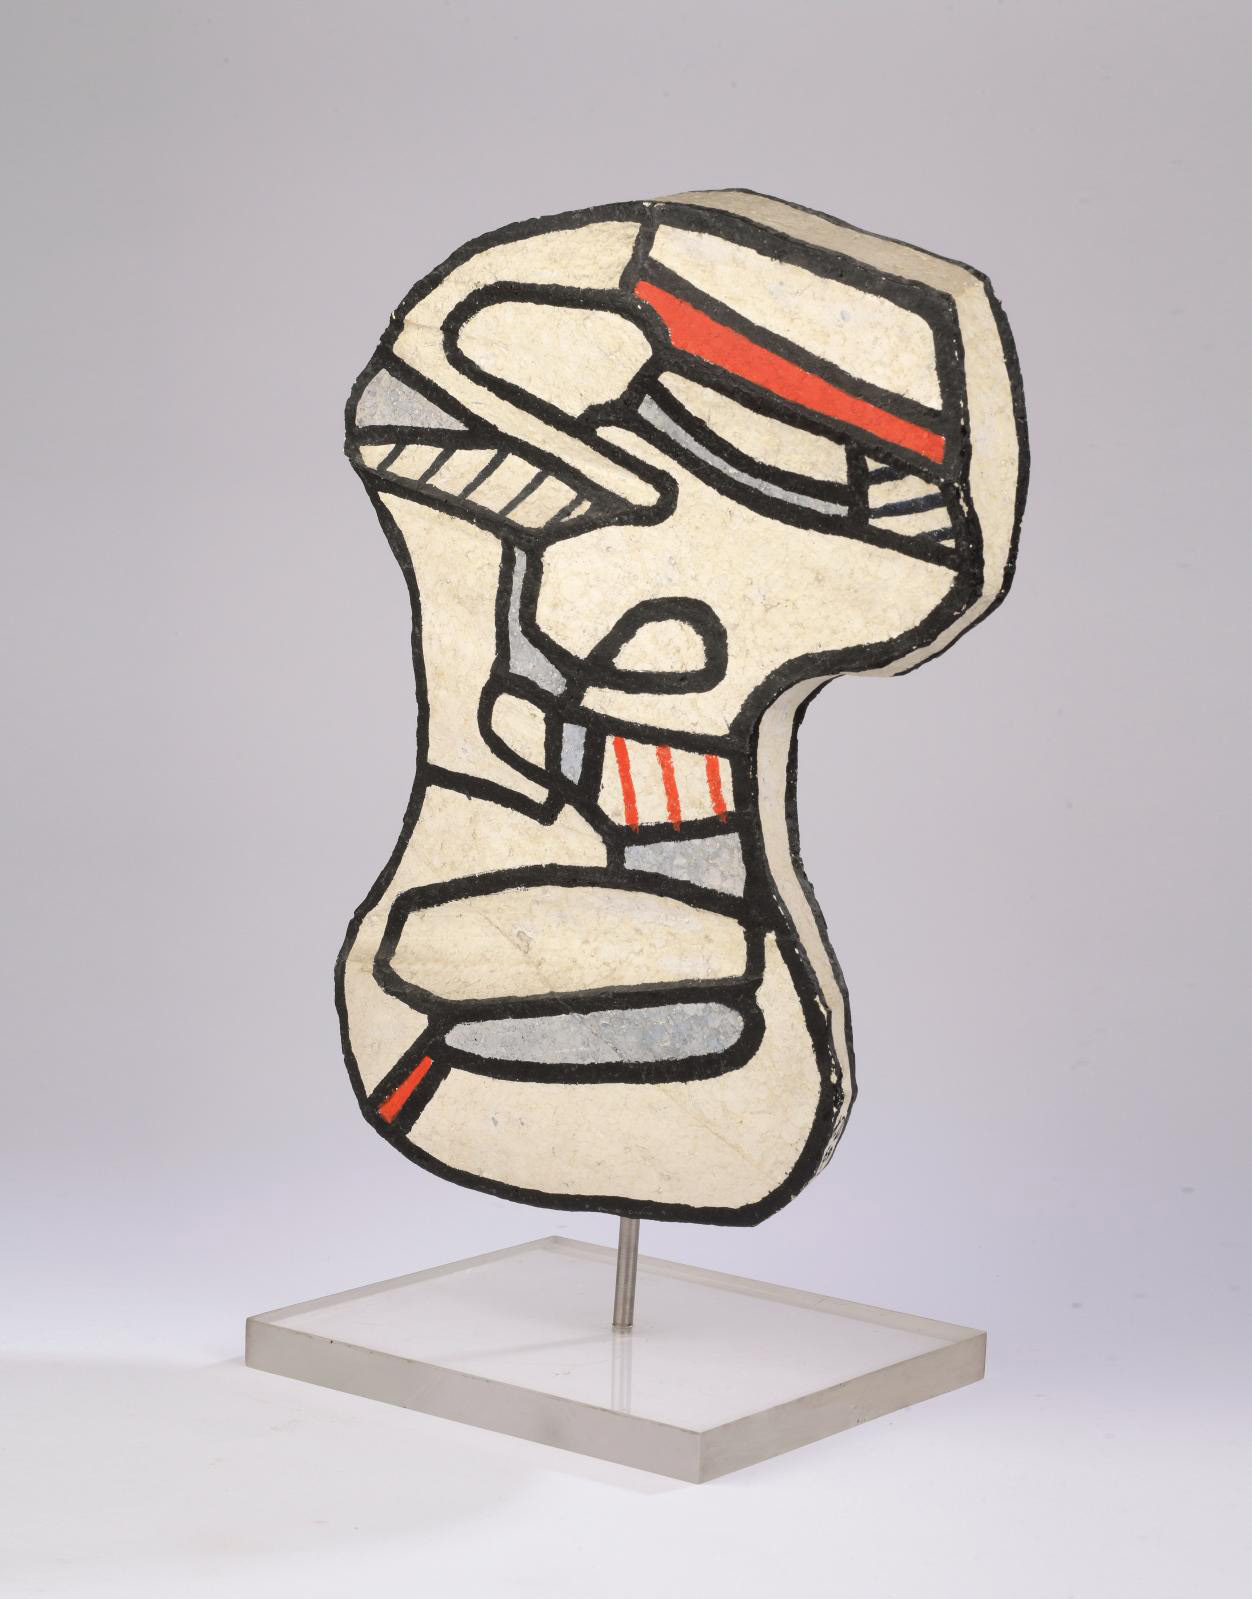 Jean Dubuffet (1901-1985), Masque de théâtre IV, 6 mars 1969 (Theater Mask IV, March 6, 1969), transfer on polyester, one-off piece originally mounted on a Plexiglas base, 39.5 x 31.5 x 5 cm/15.55 x 12.40 x 1.96 in. Estimate: €80,000/120,000